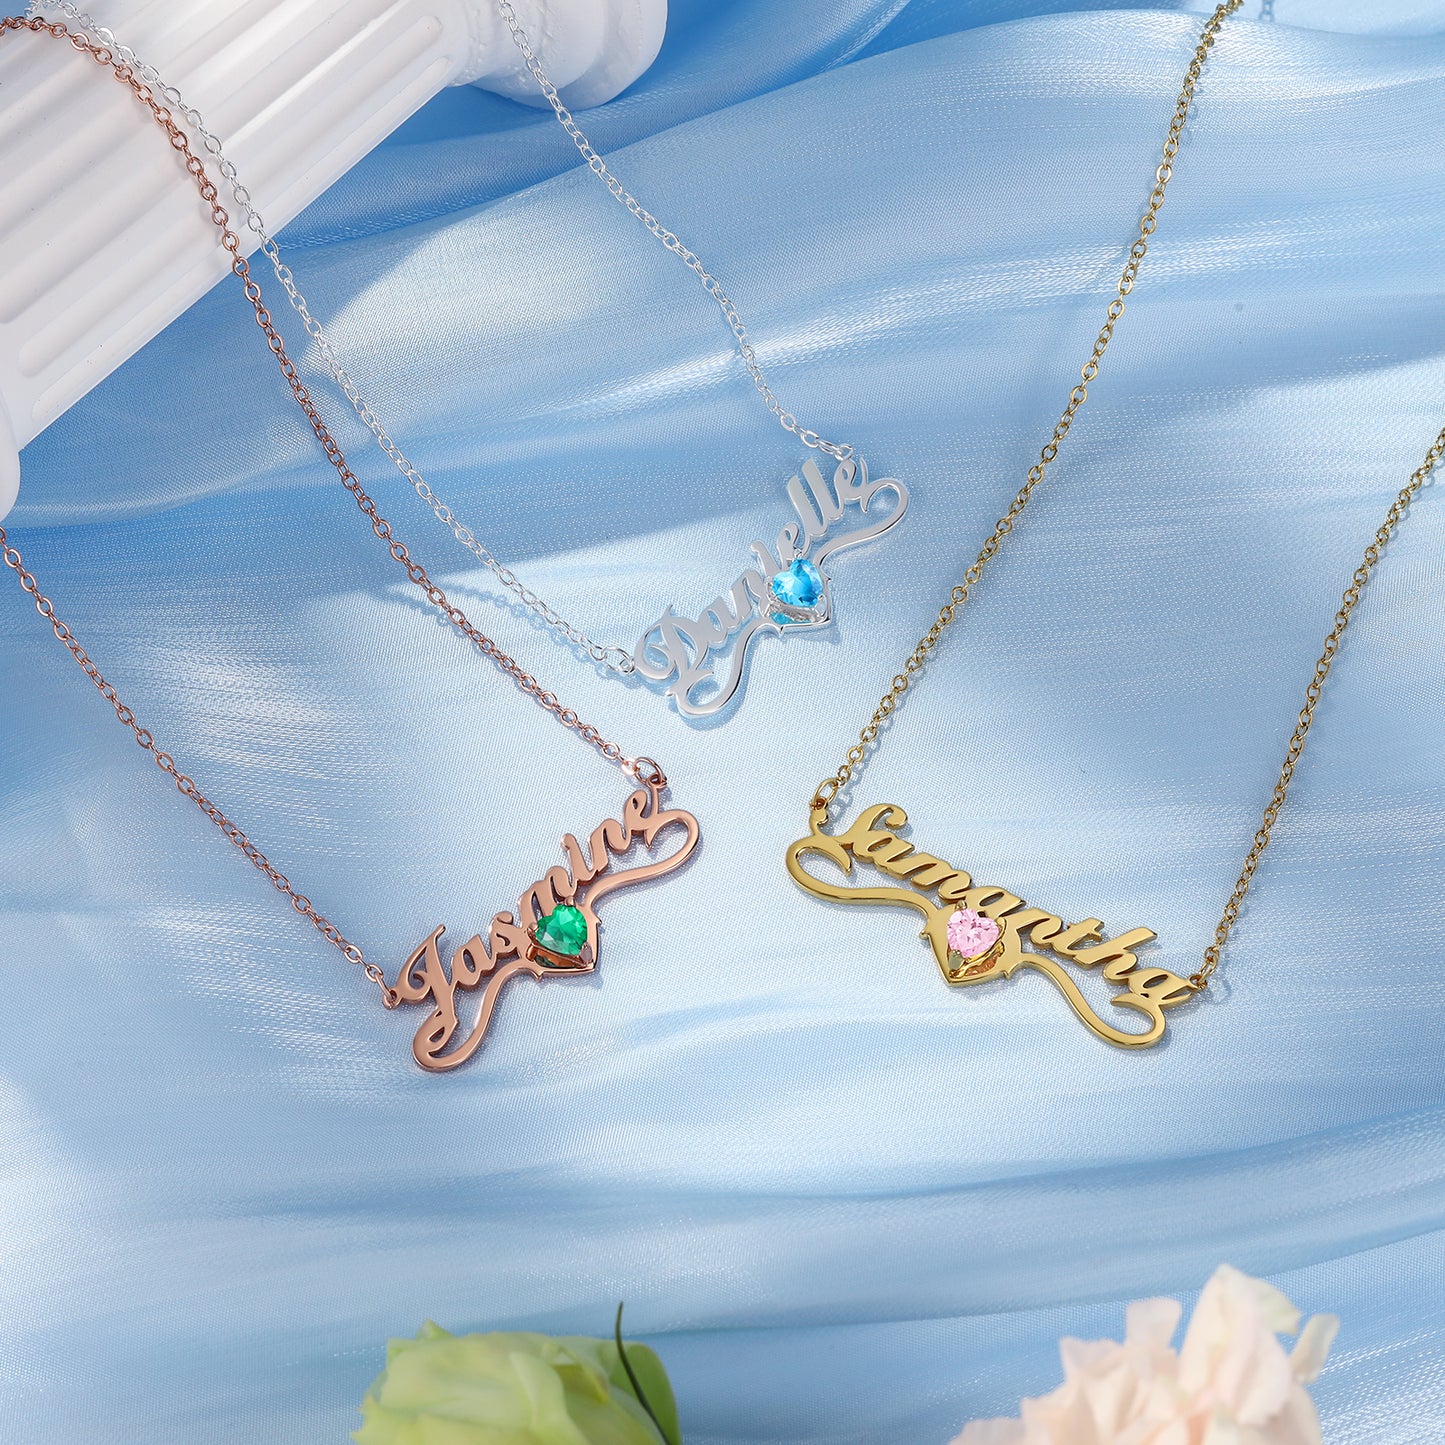 Middle Heart Name Necklace